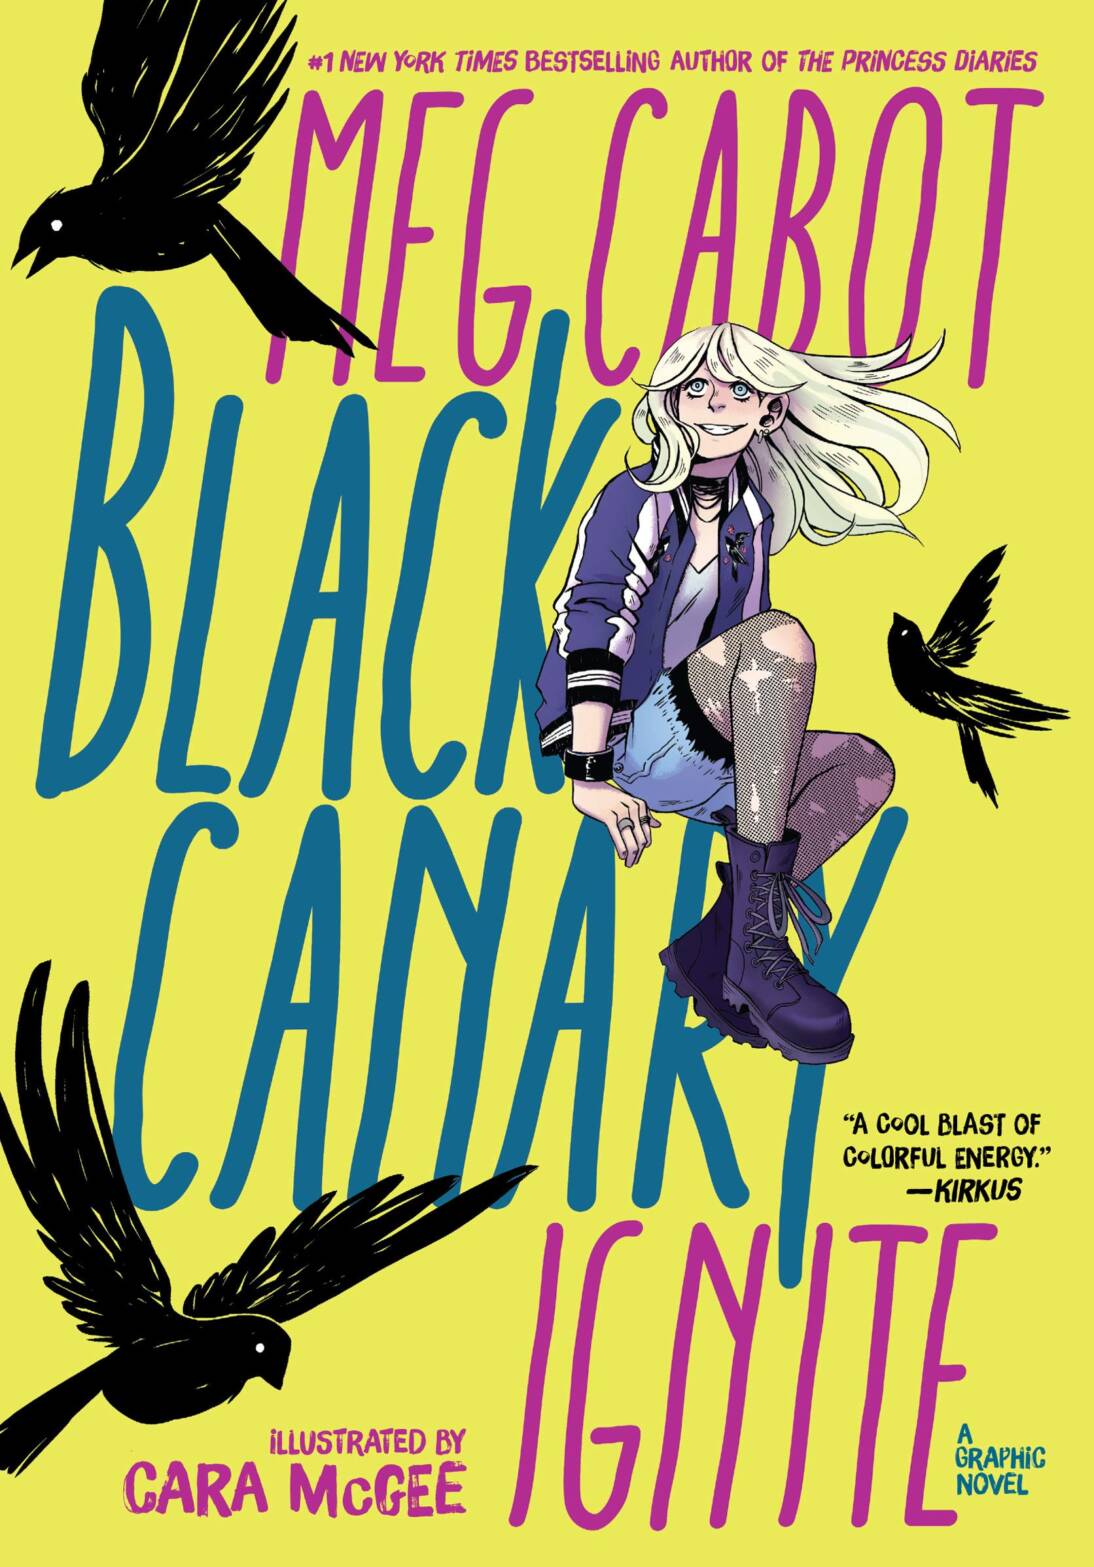 Black Canary: Ignite (Graphic Novel Review)